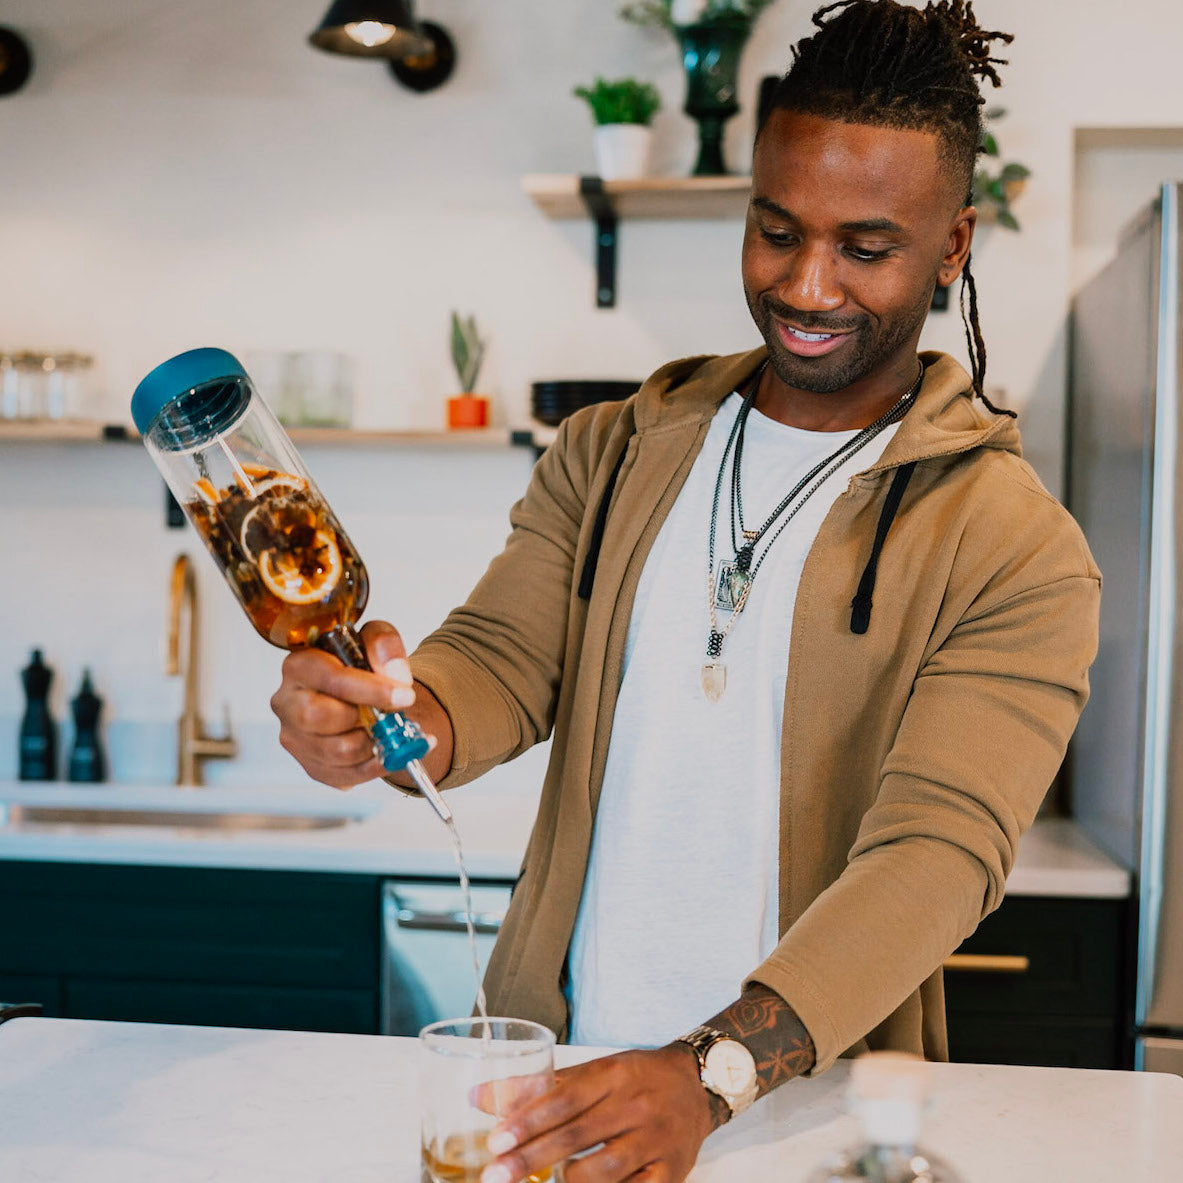 Man pouring infused spirit for his cocktail recipe